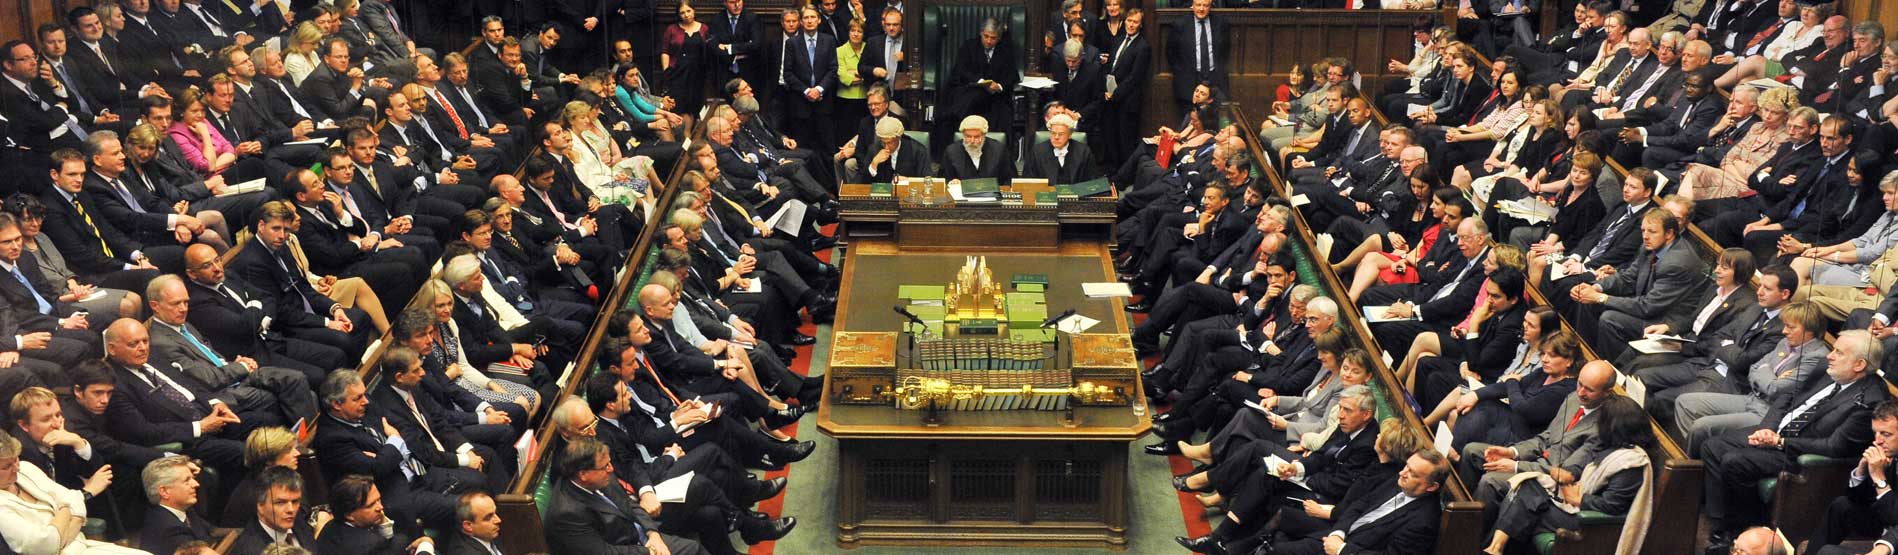 Image of The House of Commons